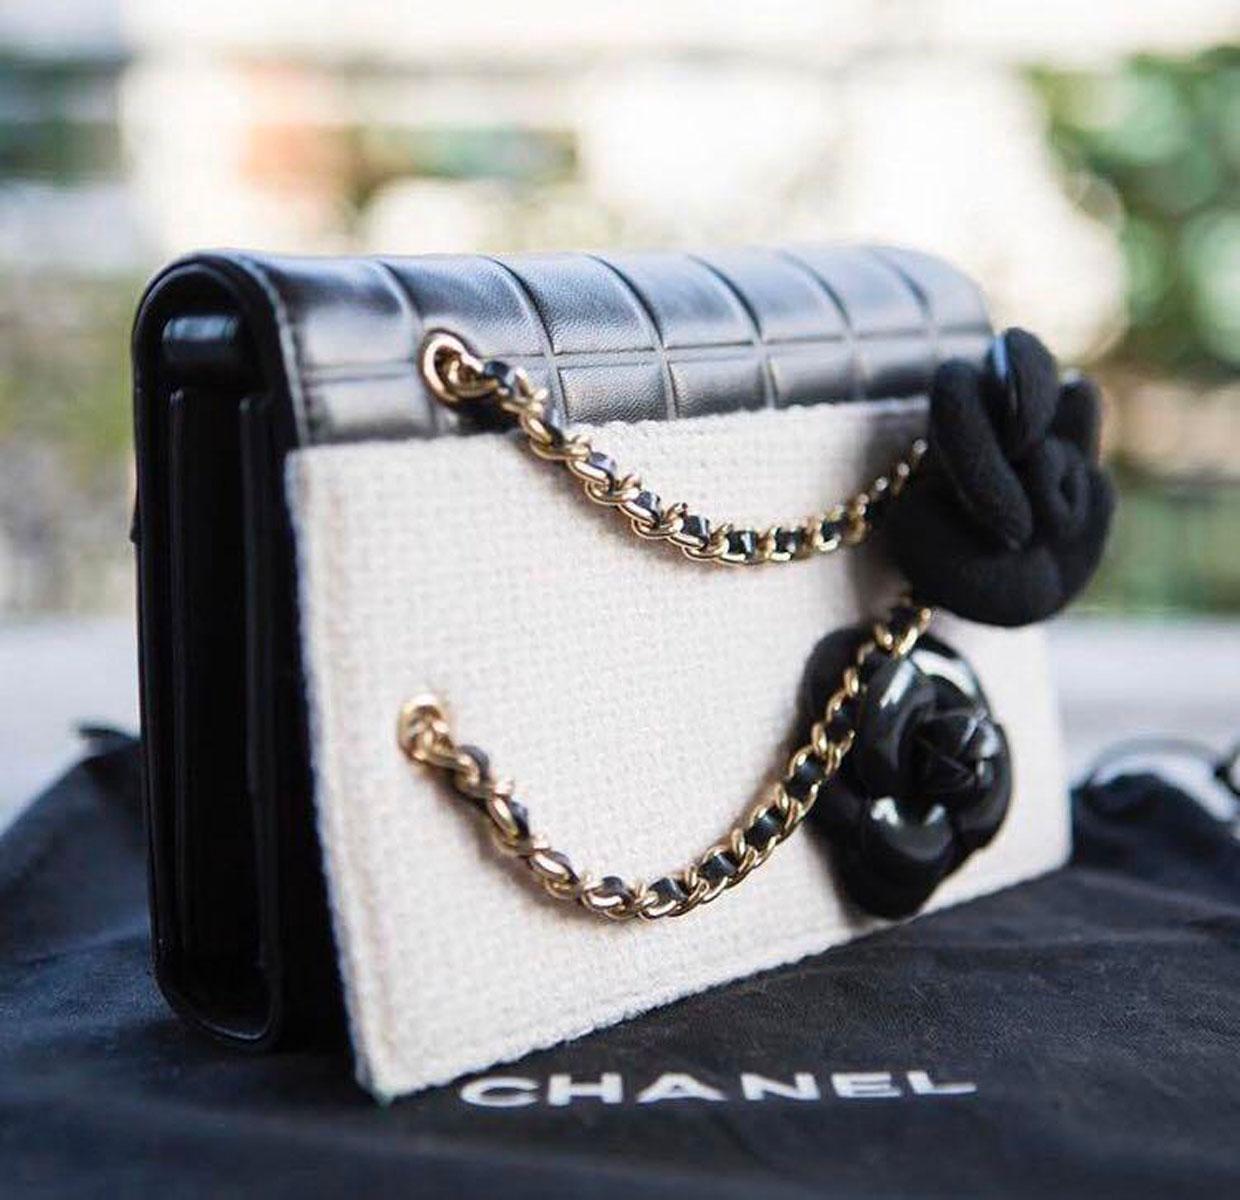 Chanel Timeless Tweed Iconic Camelia Flower Bicolor Black & White Leather Clutch For Sale 5